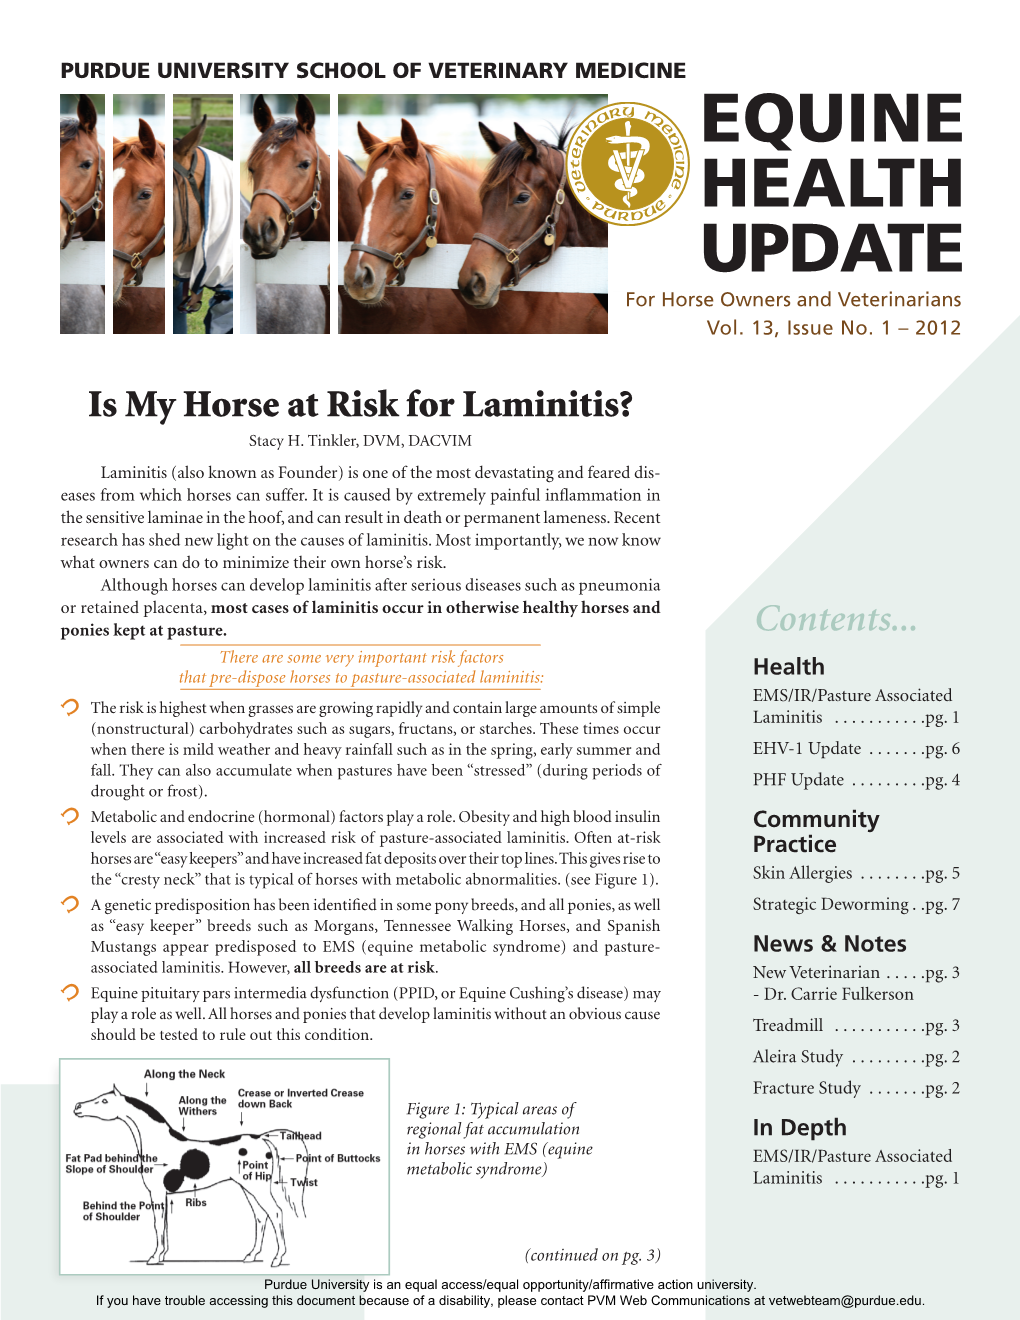 EQUINE HEALTH UPDATE for Horse Owners and Veterinarians Vol